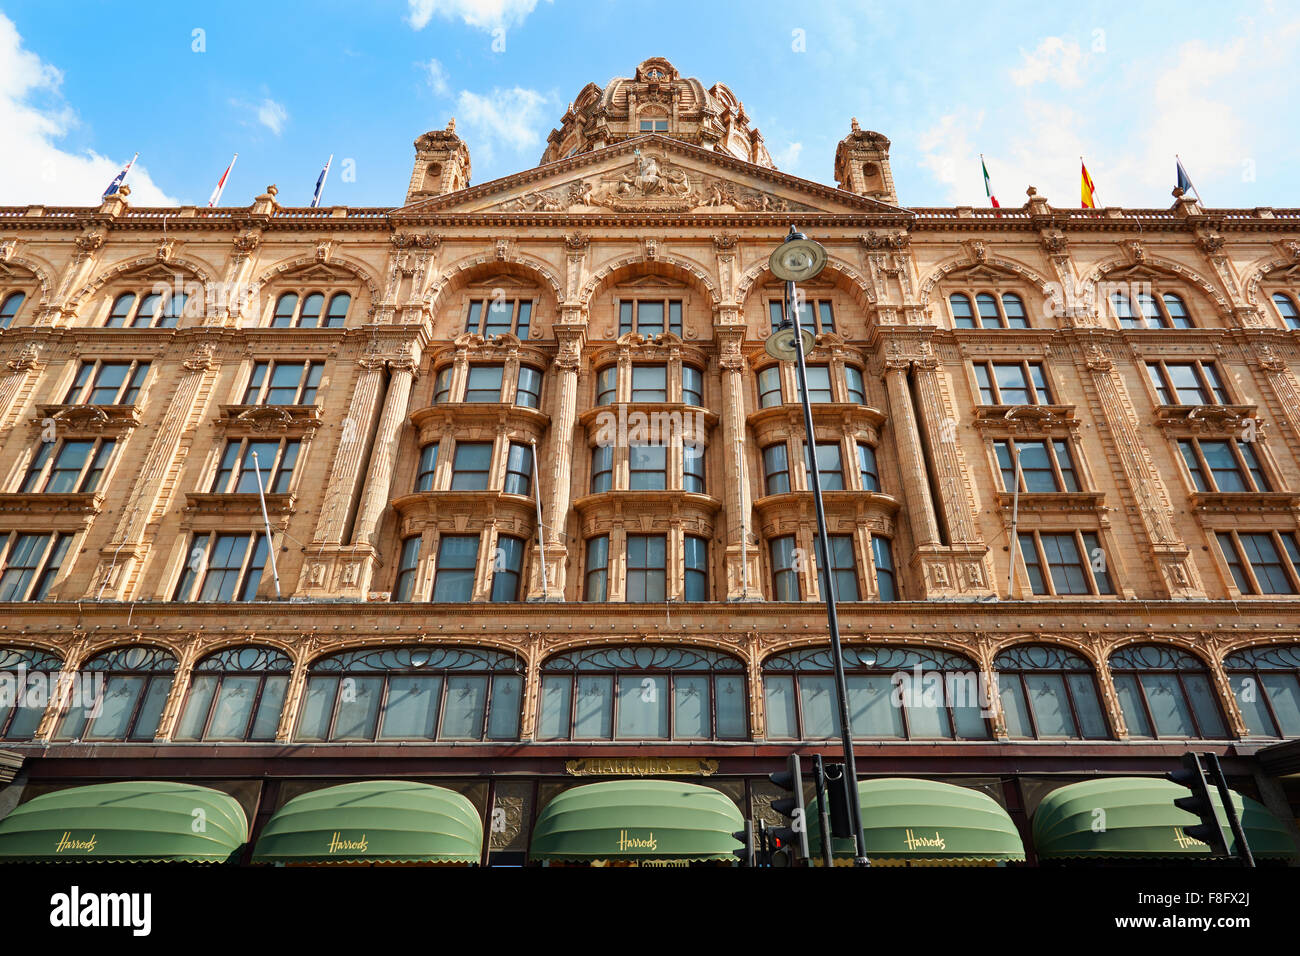 The famous Harrods department store building facade in a summer afternoon in London Stock Photo